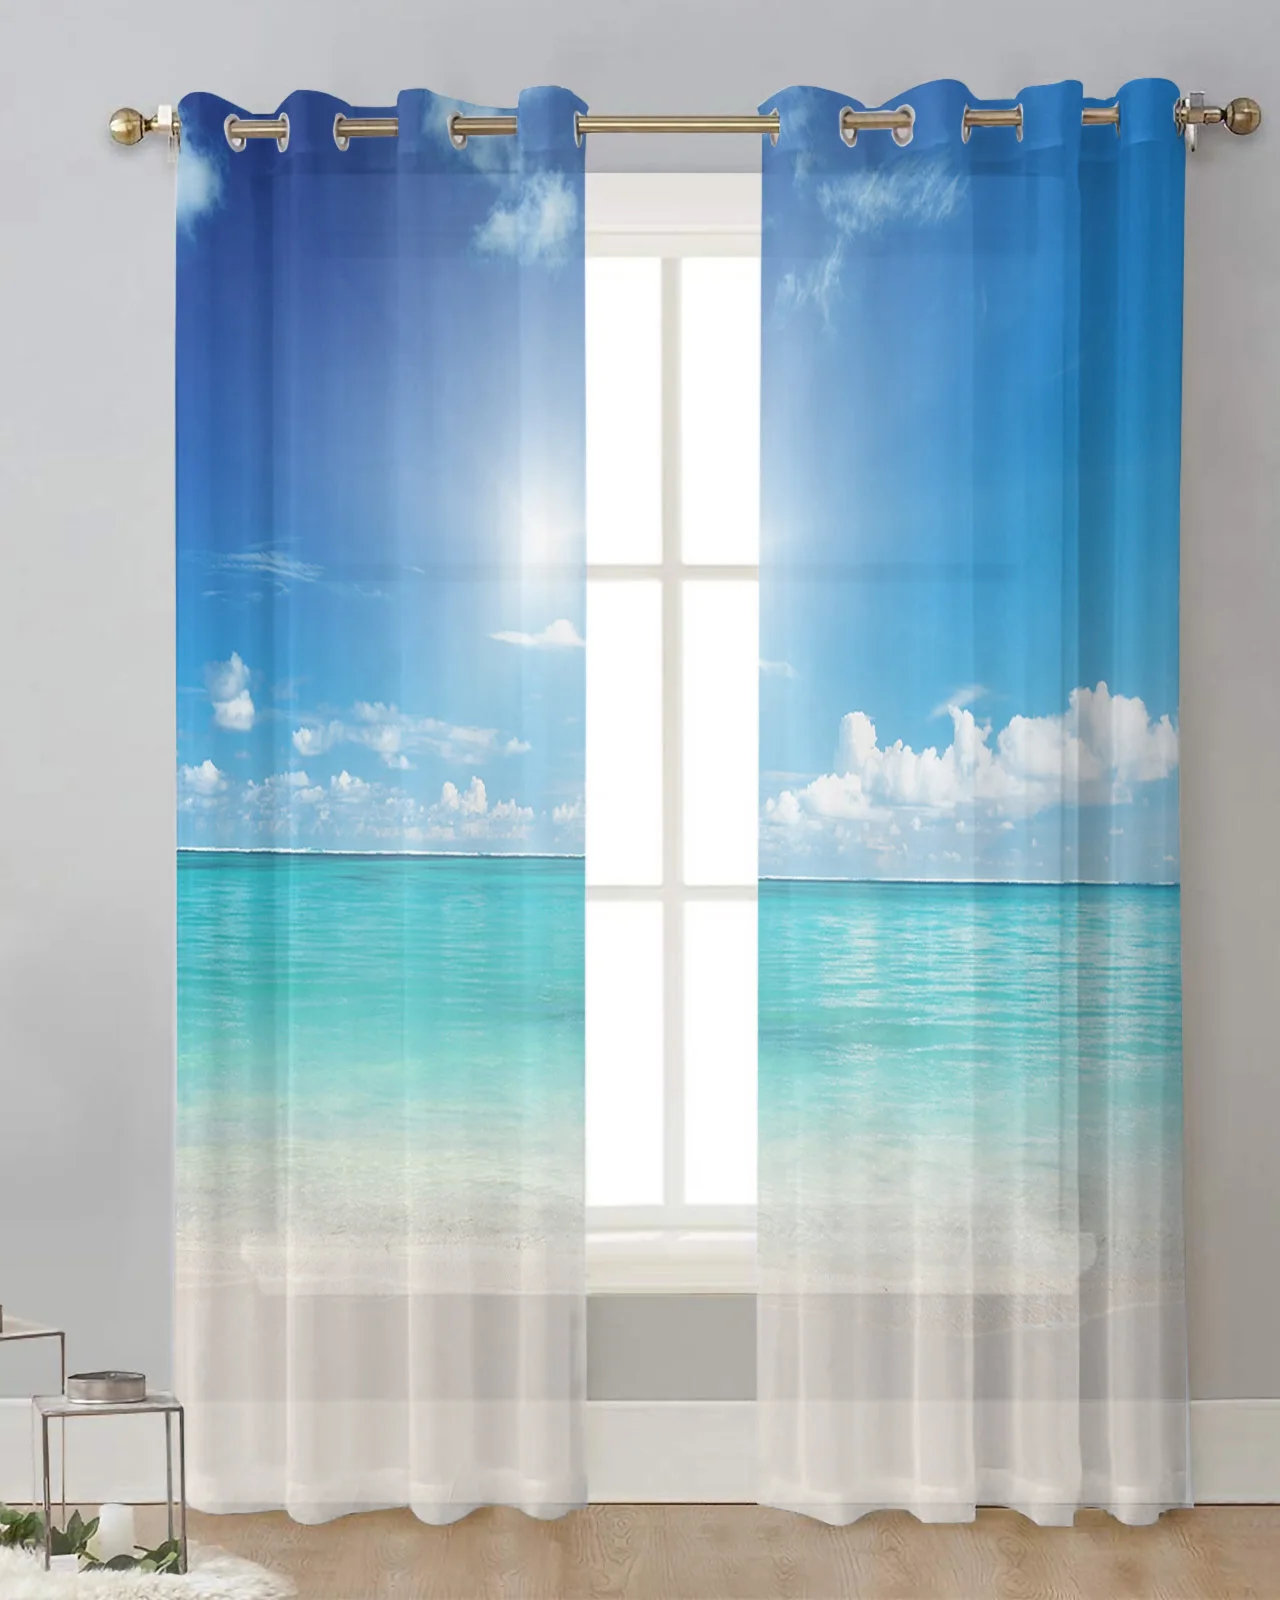 Blue Seaside Beach Clouds Tulle Curtain for Living Room Bedroom Transparent Sheer Curtains Window Treatment Drapes